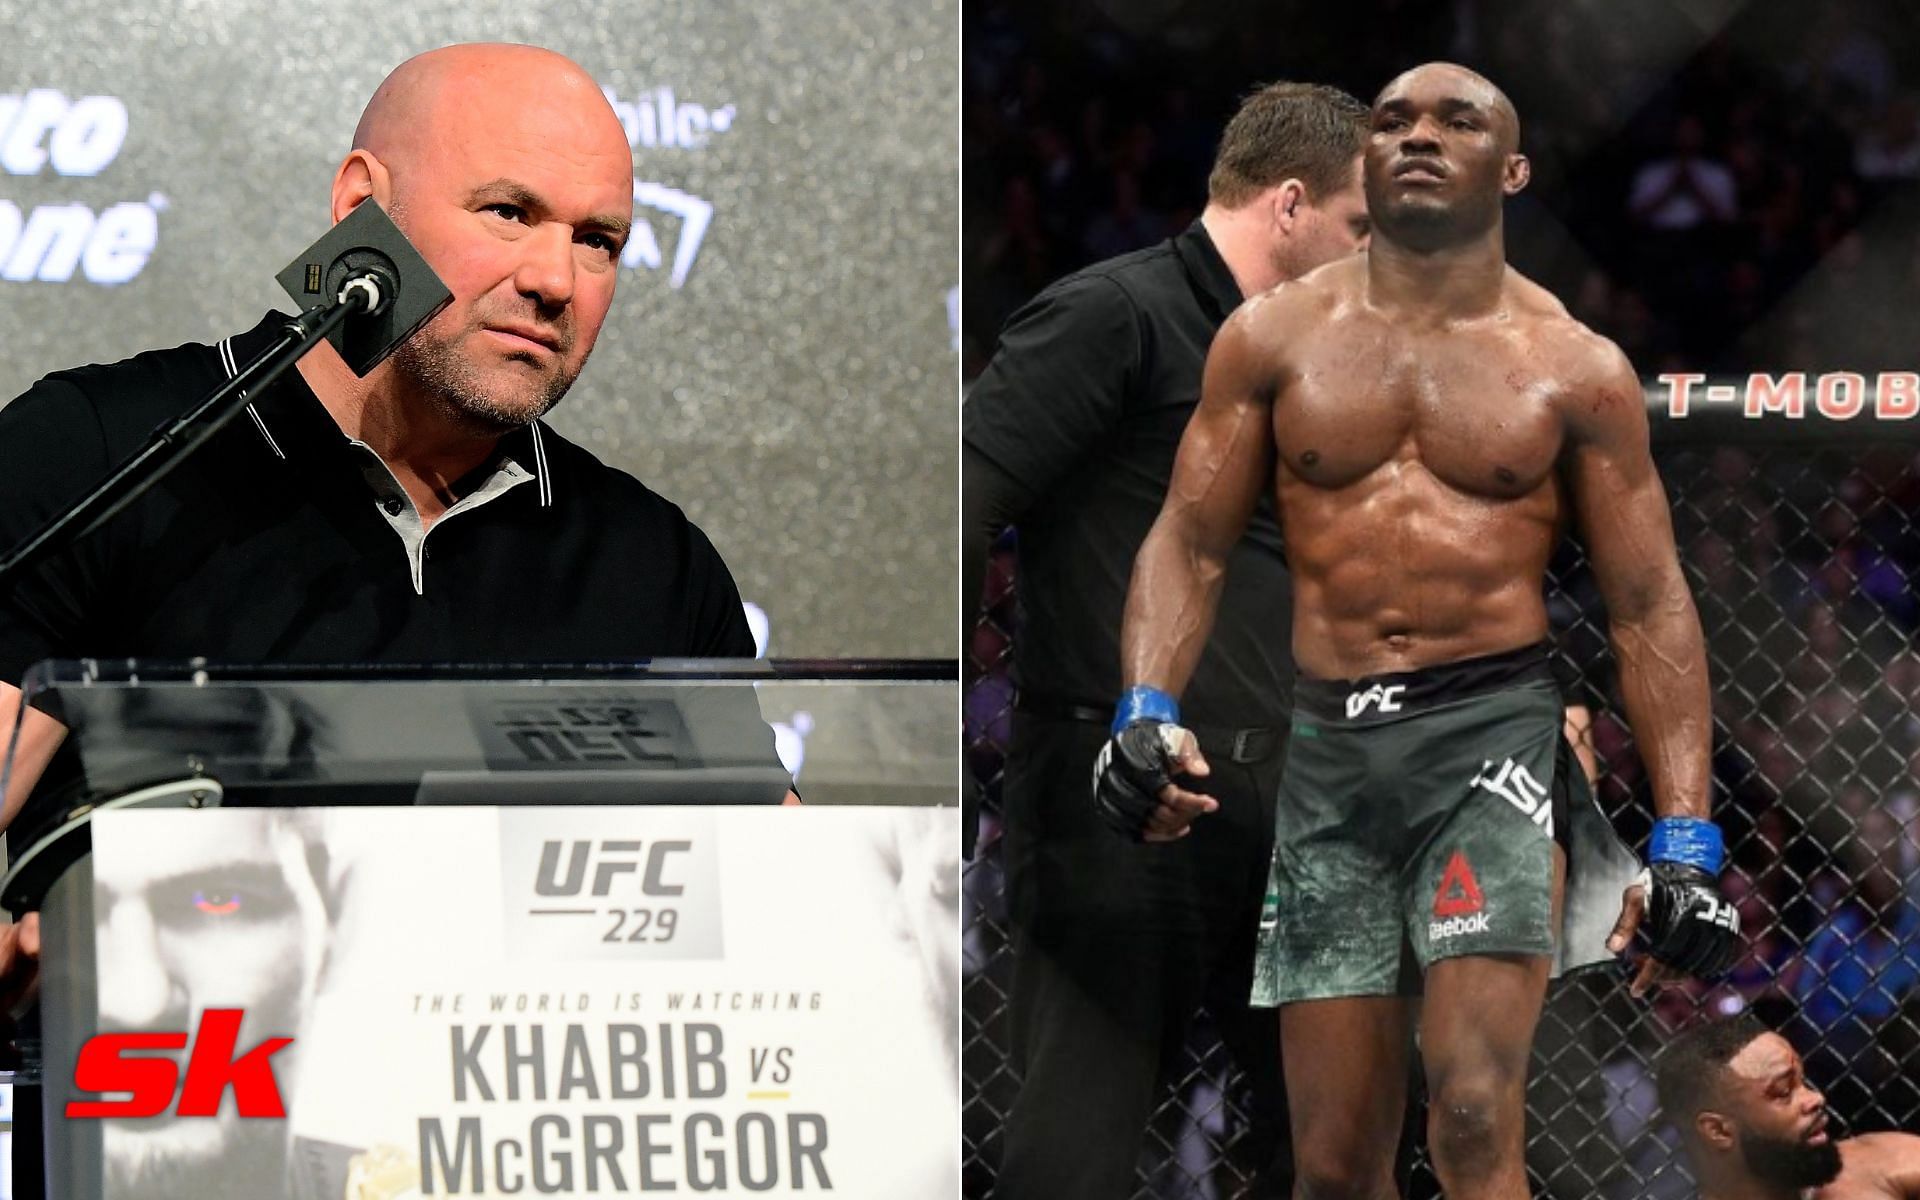 Dana White at UFC press conference (left - via Getty), Kamaru Usman after beating Tyron Woodley (right - via Getty)